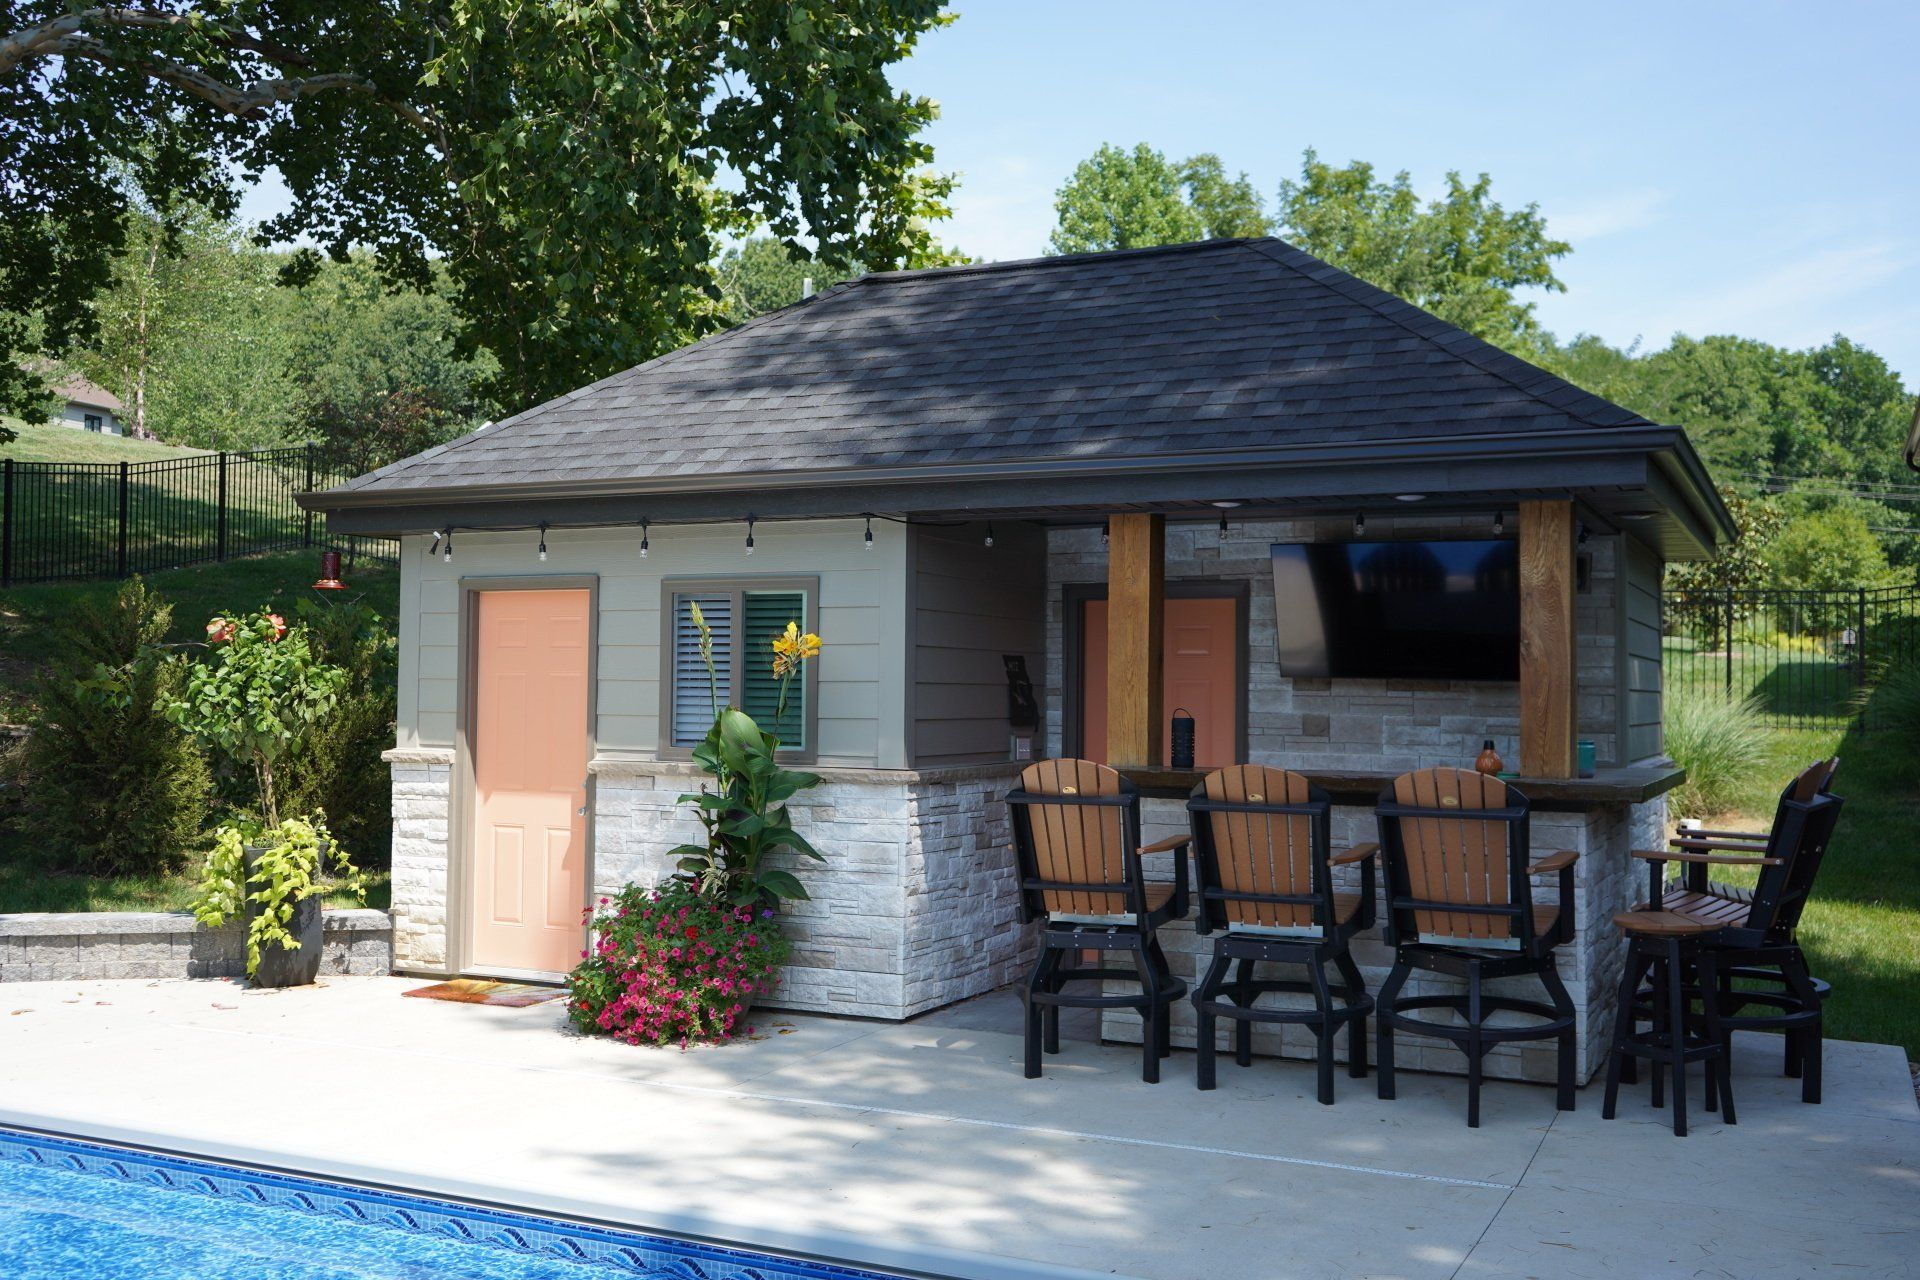 Catch the Game & Enjoy Pool Time at Your Pool House Built by Peavler Construction in Mid-Missouri.